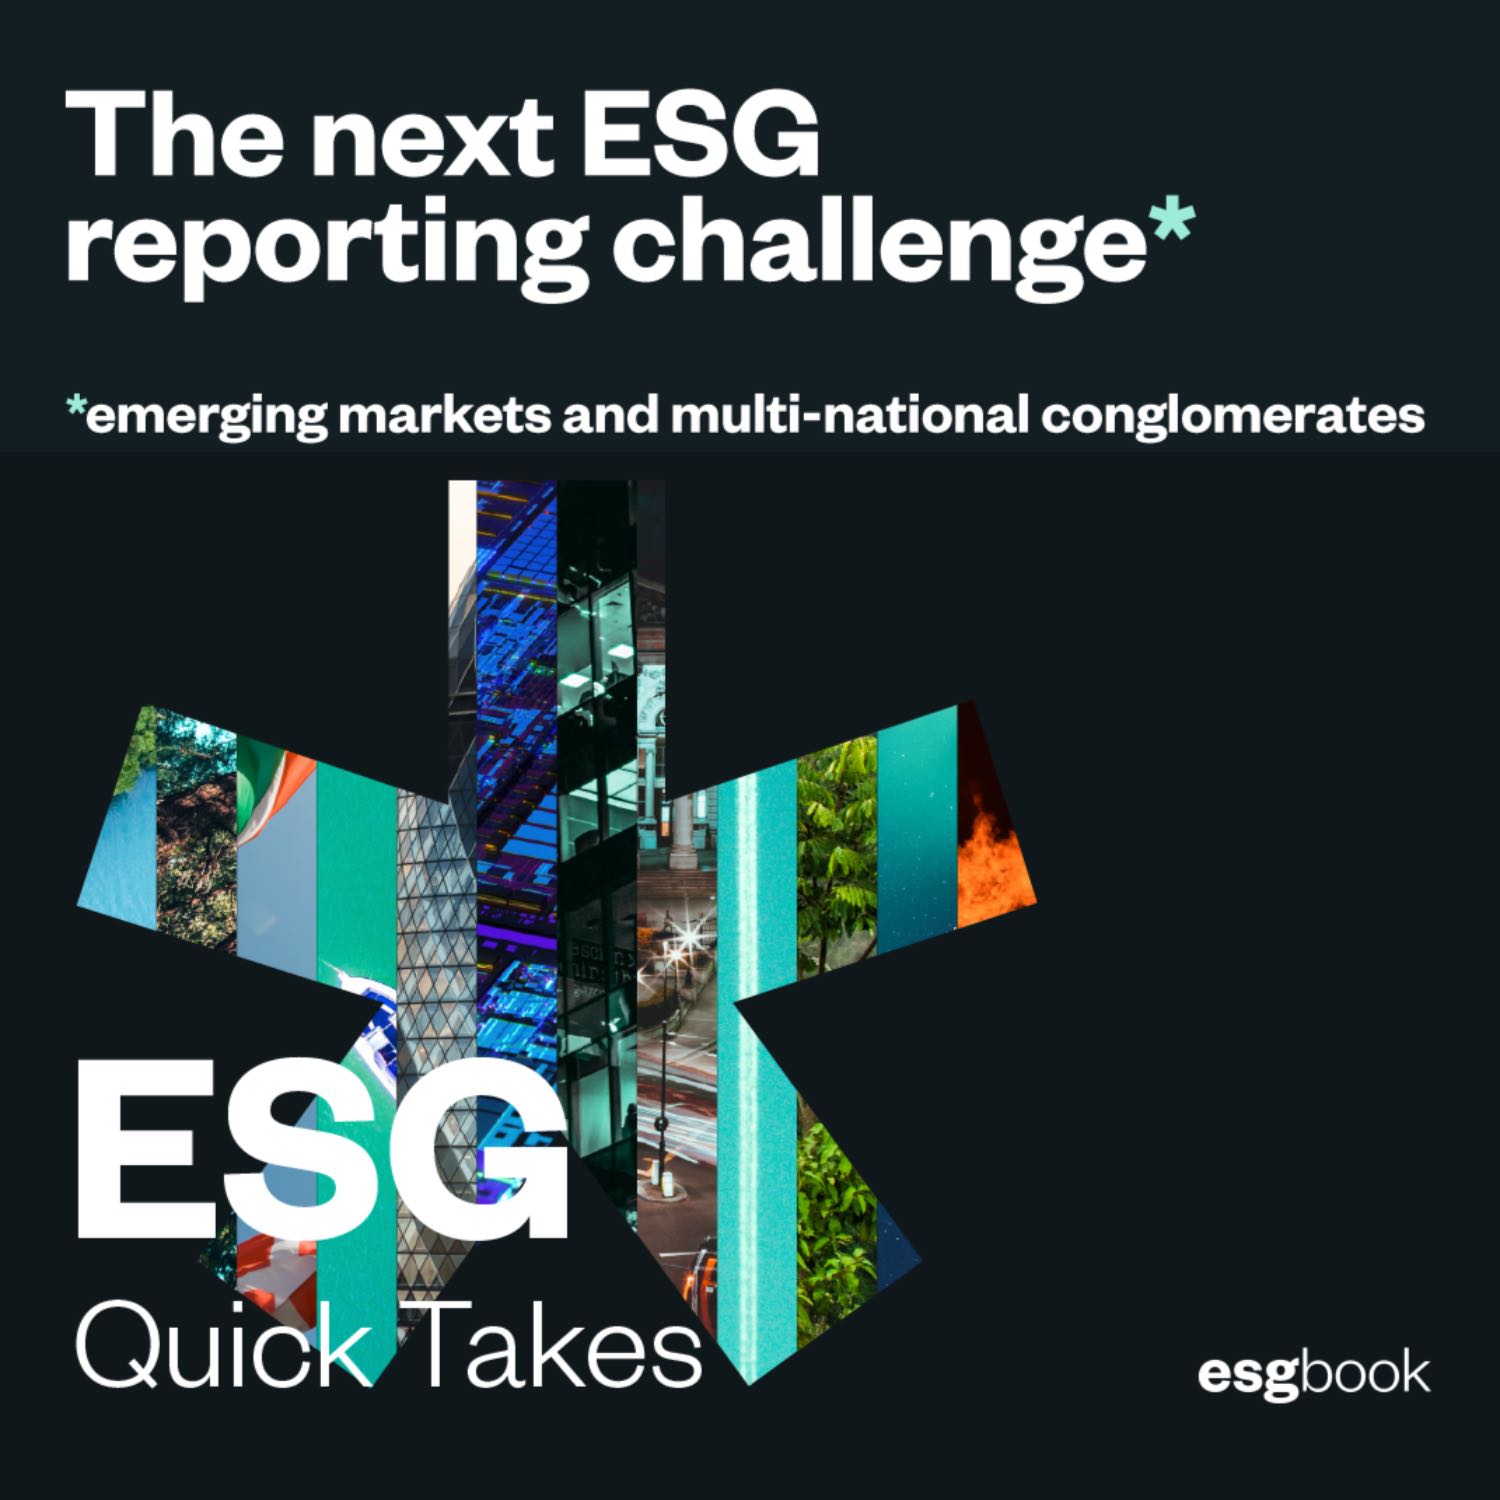 The next ESG reporting challenge: emerging markets and multi-national conglomerates